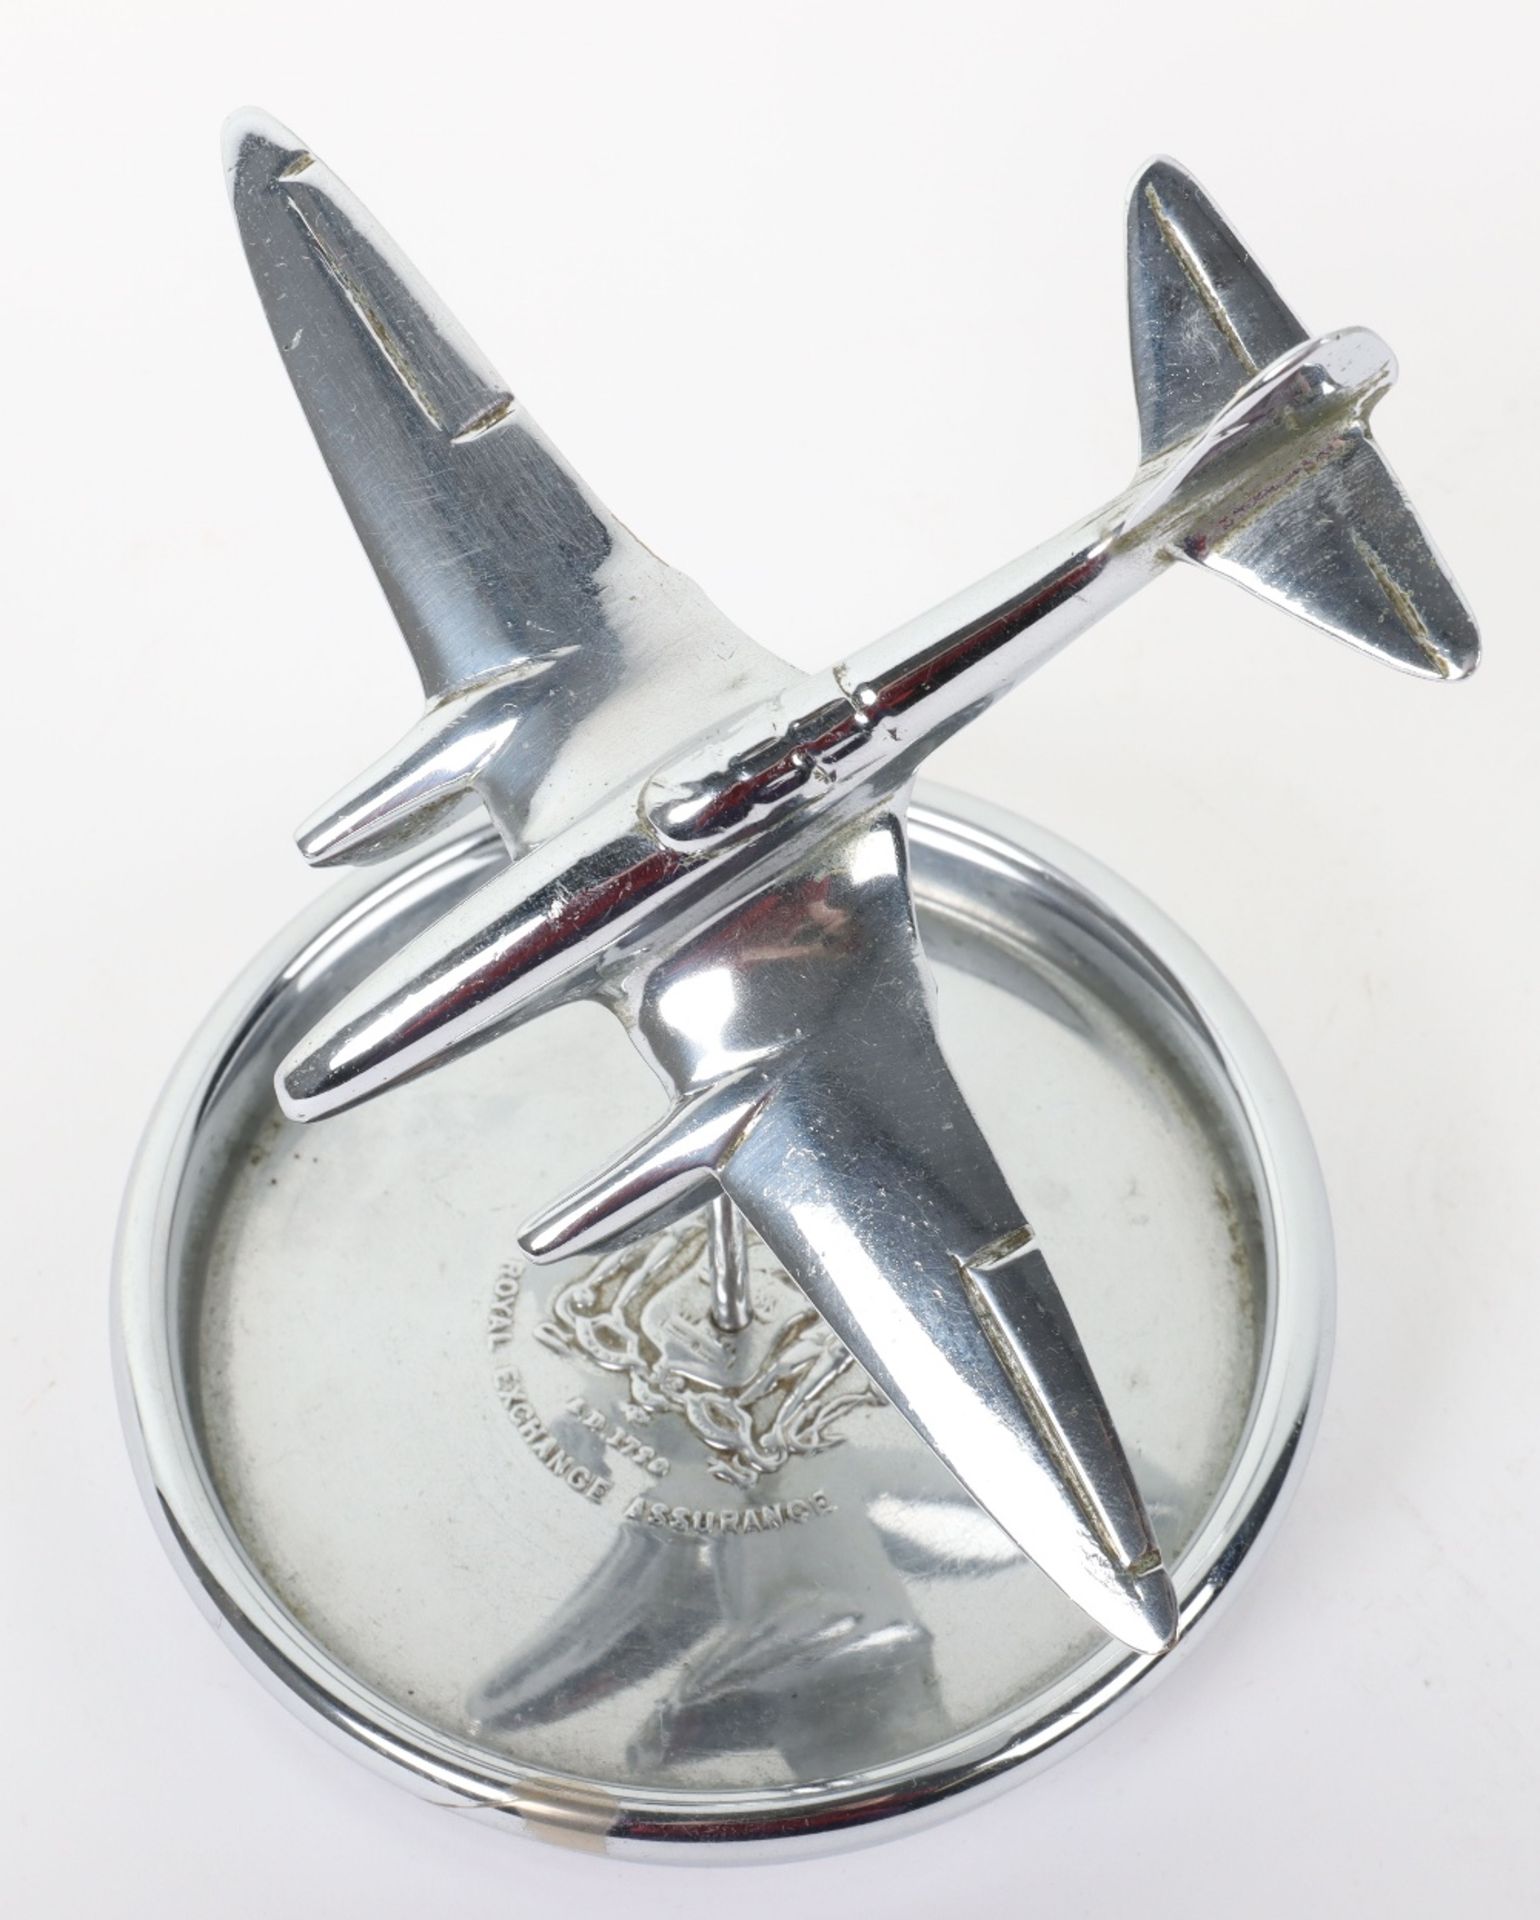 Desk Ashtray with Model of a WW2 Dive Fighter Bomber in Flight - Image 6 of 7